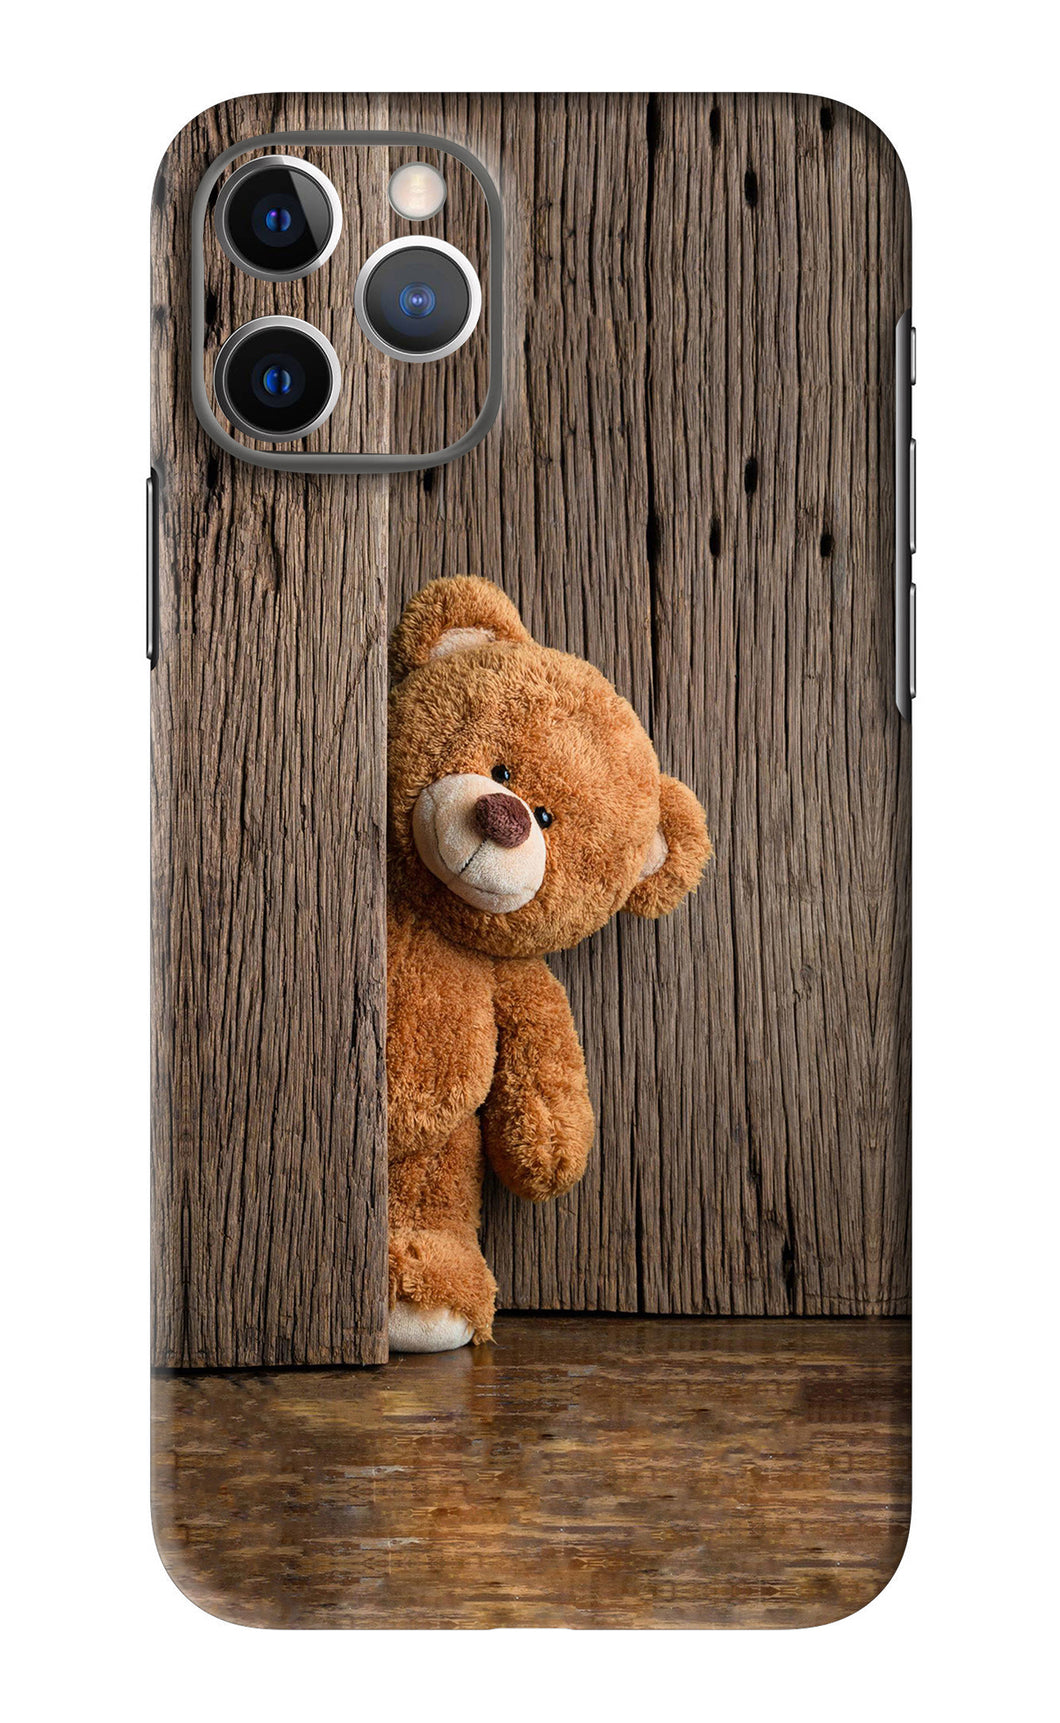 Teddy Wooden iPhone 11 Pro Max Back Skin Wrap